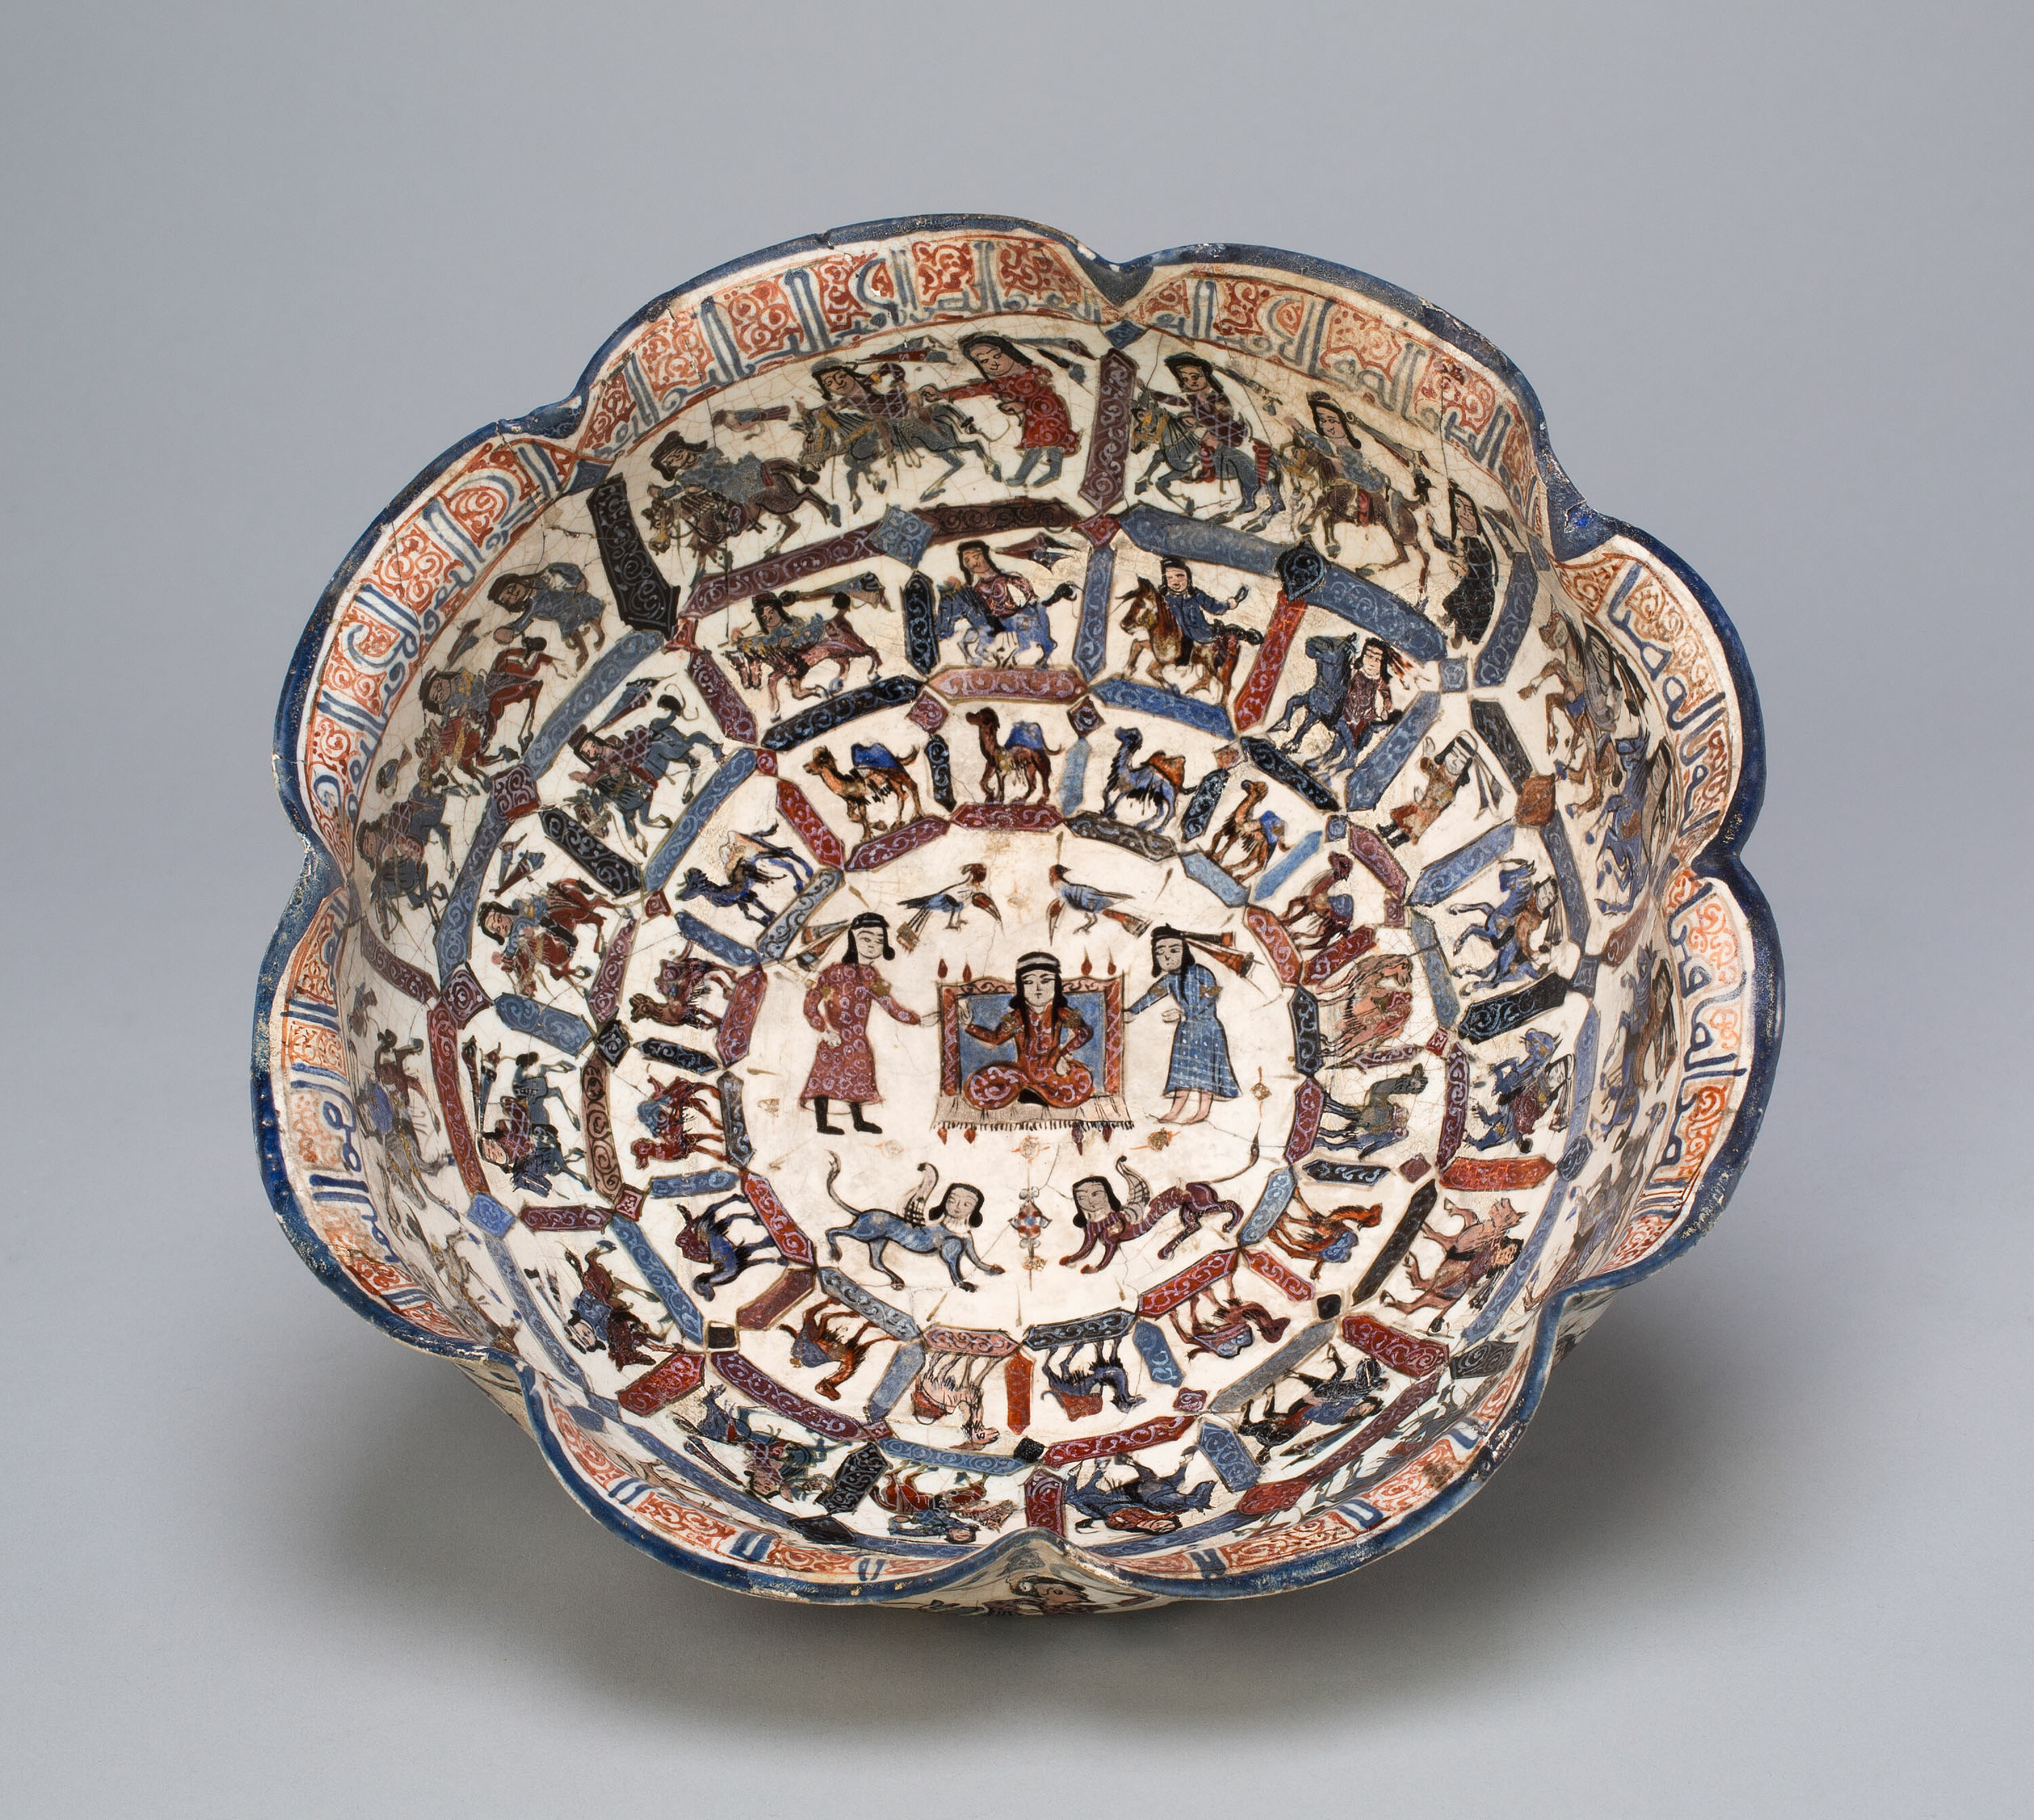 Lobed Bowl with Seated Figure and Attendants, Seljuq dynasty (ca. late 12th-early 13th century), Iran, probably Kashan.jpg